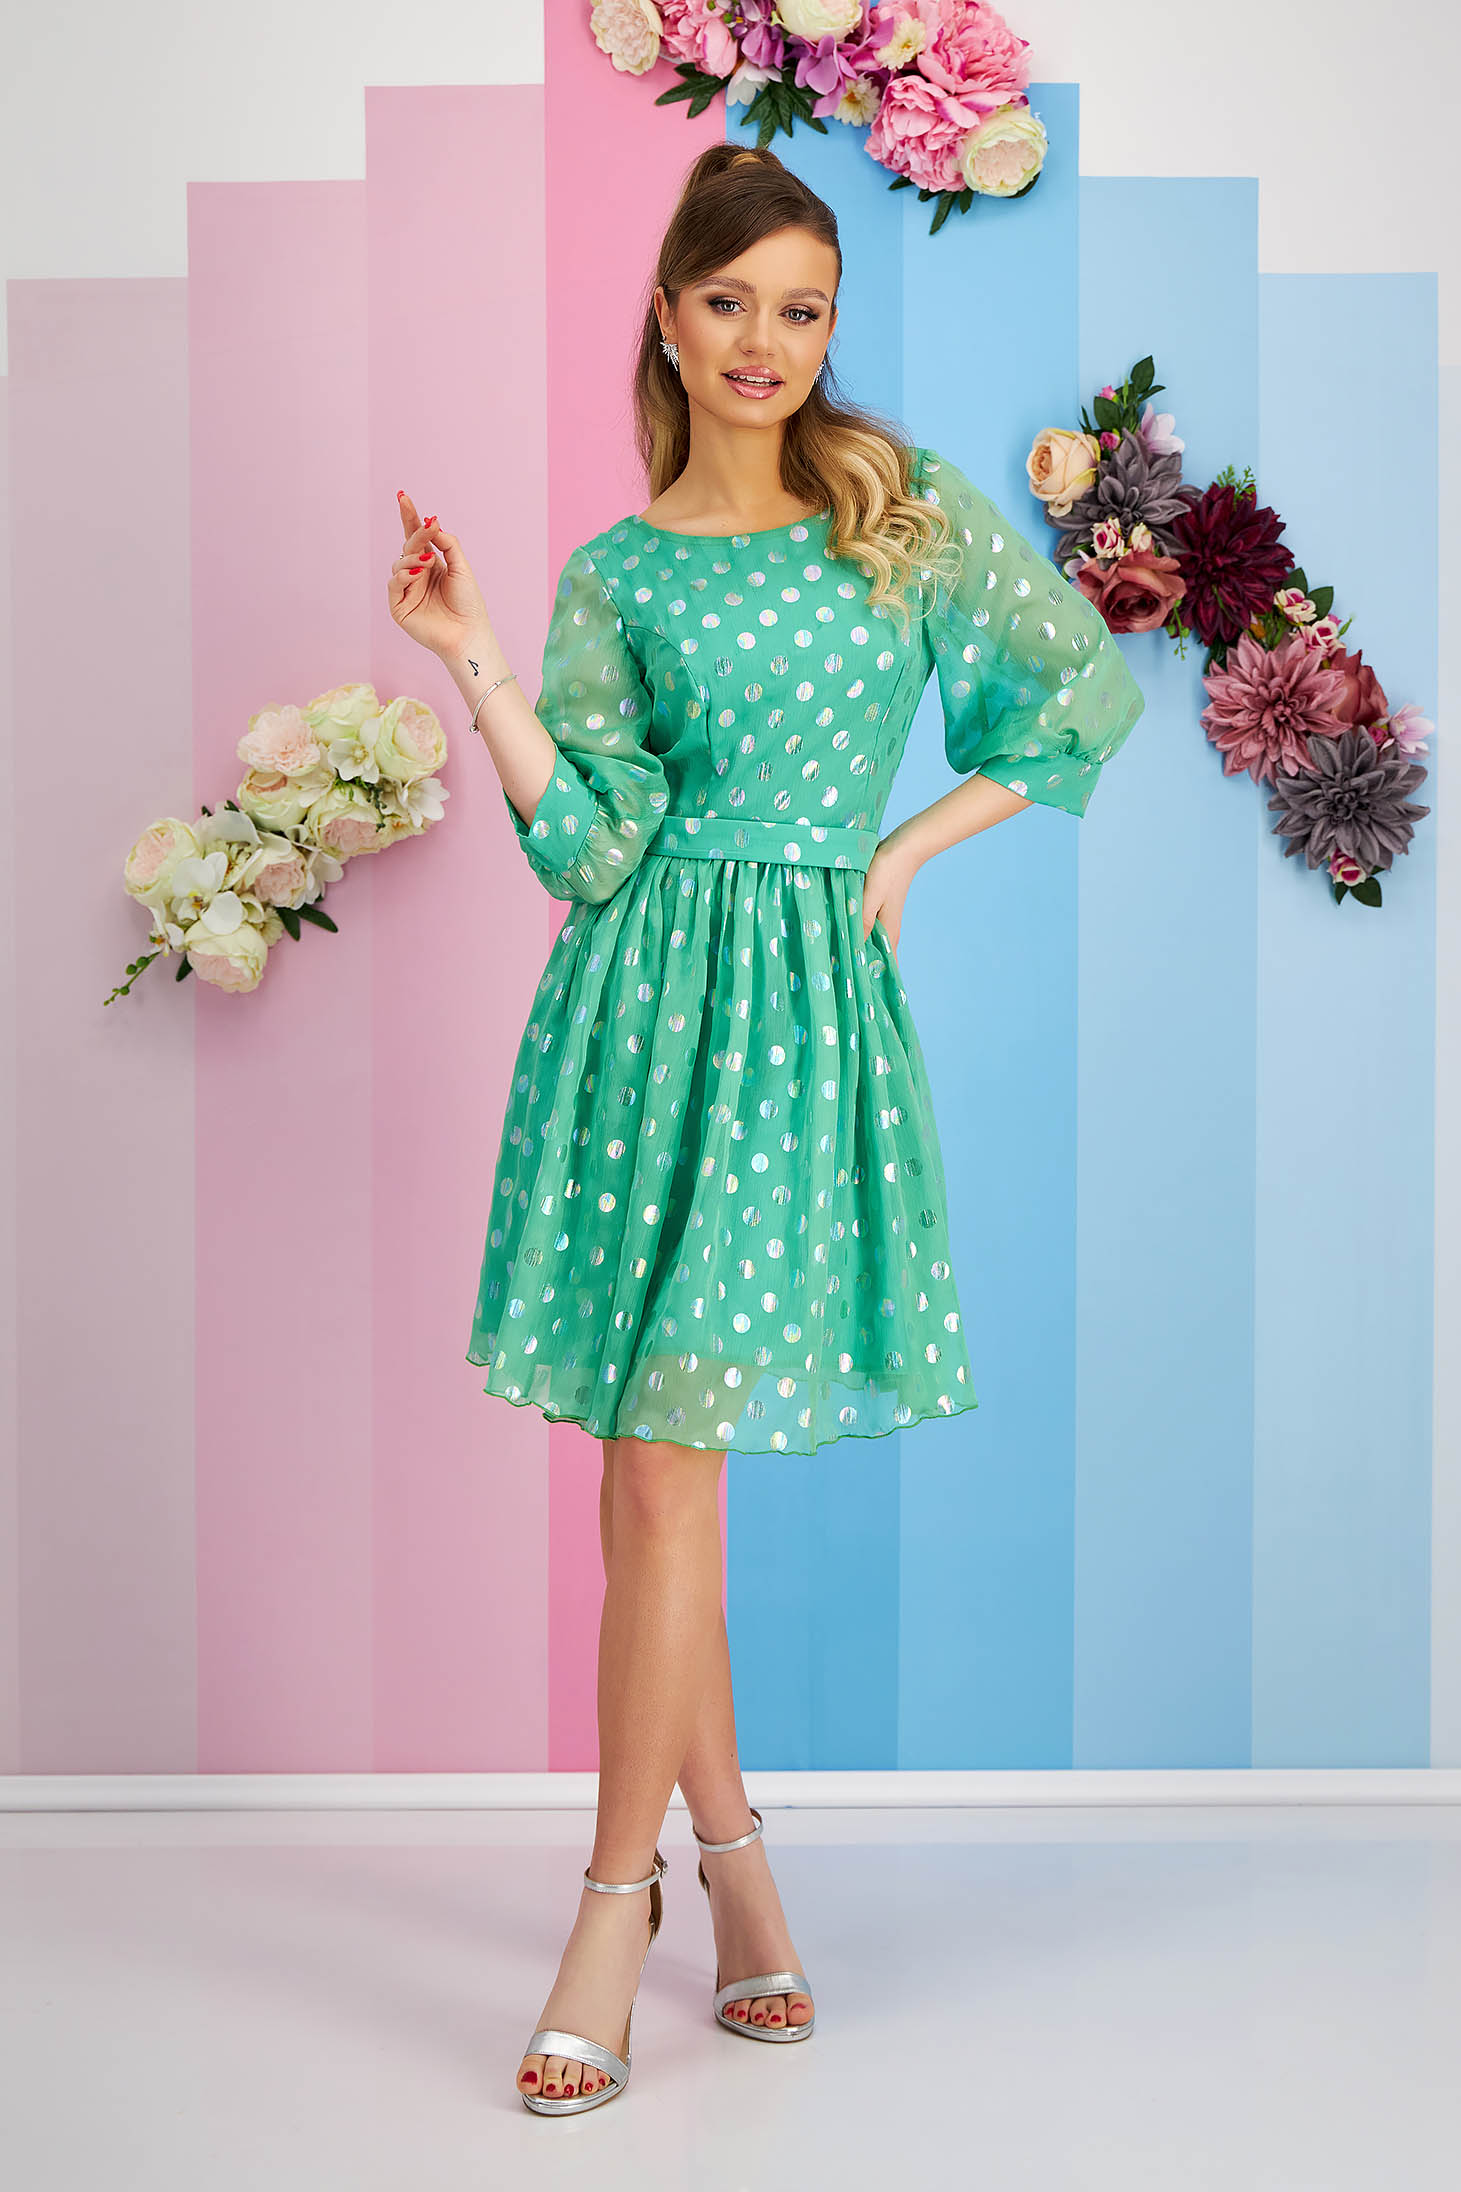 Green veil dress in flared style with polka dots, accessorized with belt and bow - StarShinerS 1 - StarShinerS.com